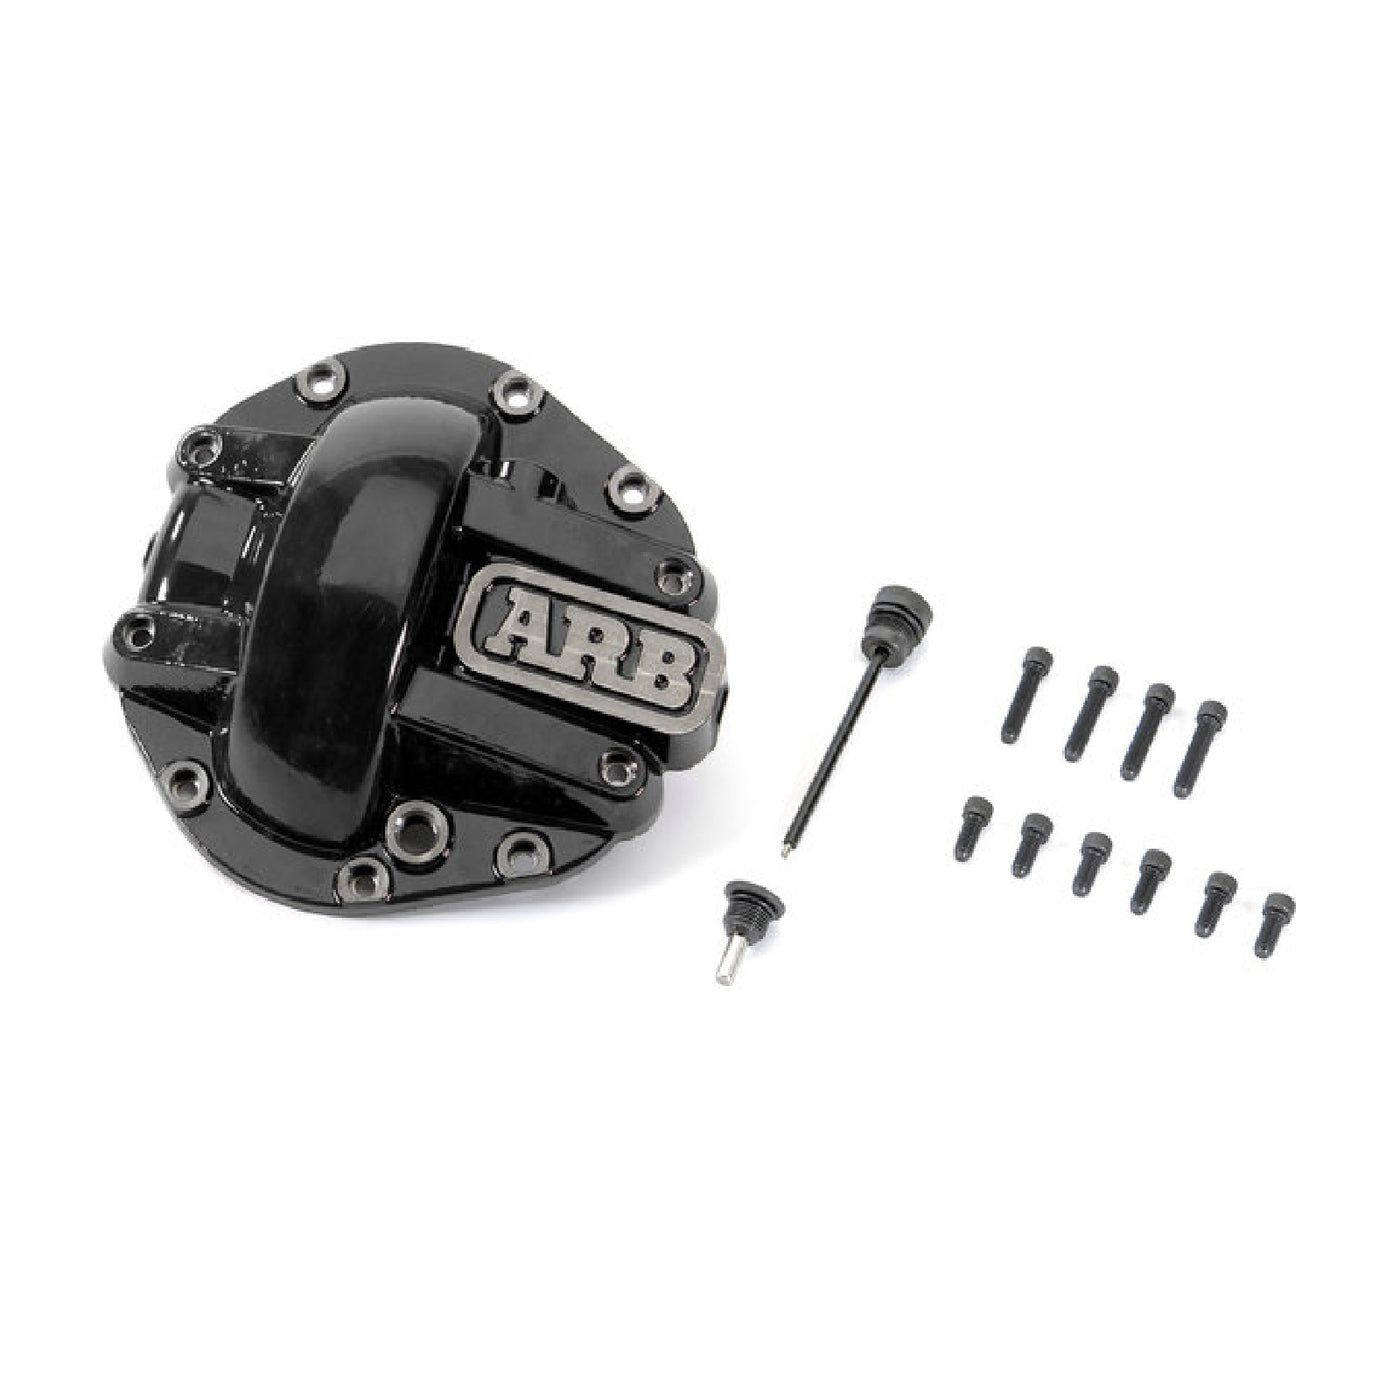 ARB FRONT M210 DIFF COVER - BLACK